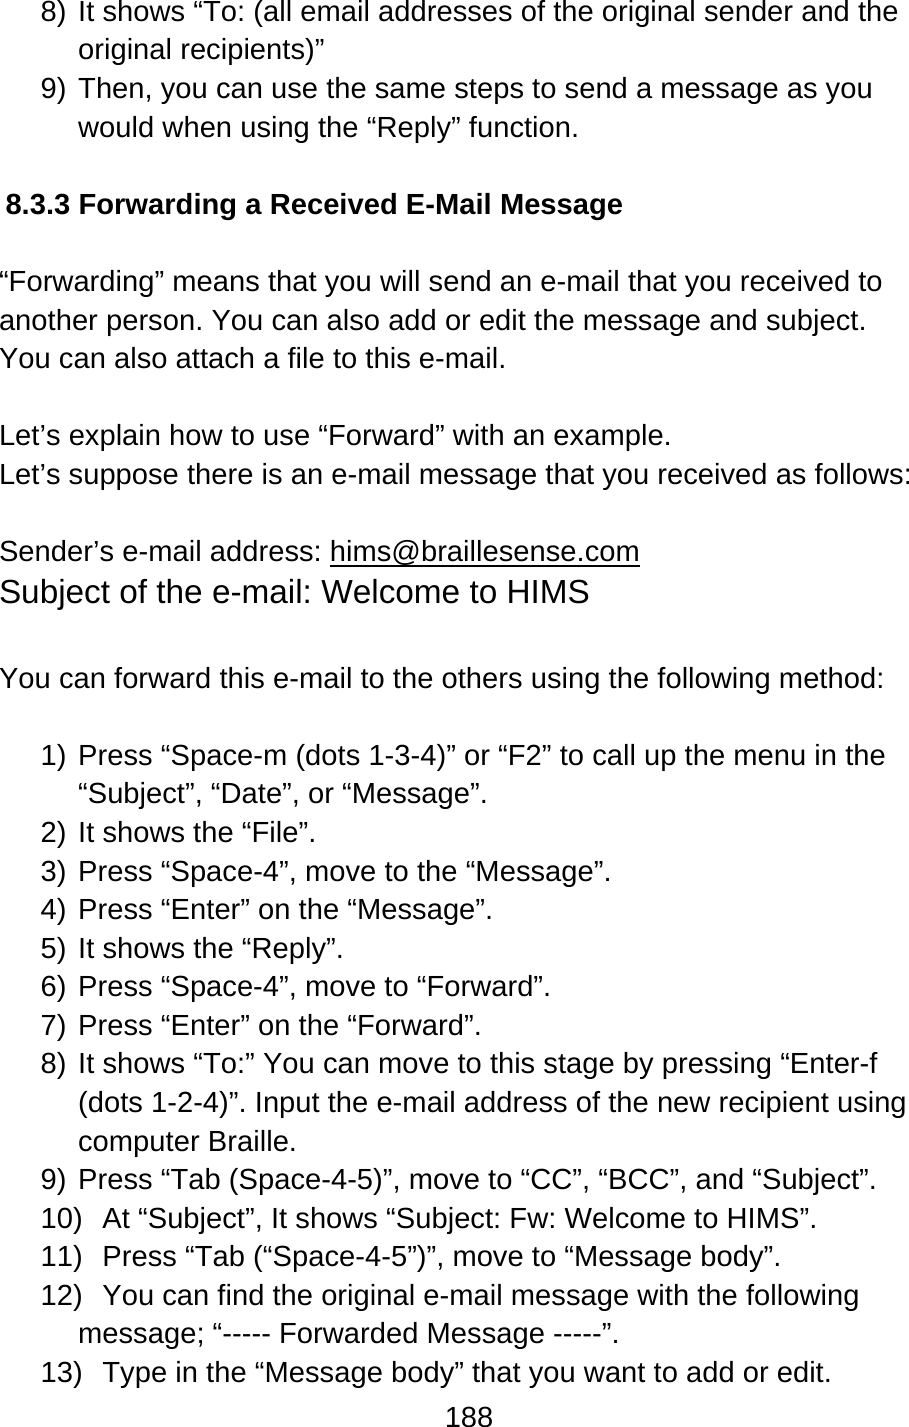 188  8) It shows “To: (all email addresses of the original sender and the original recipients)” 9) Then, you can use the same steps to send a message as you would when using the “Reply” function.  8.3.3 Forwarding a Received E-Mail Message  “Forwarding” means that you will send an e-mail that you received to another person. You can also add or edit the message and subject.   You can also attach a file to this e-mail.      Let’s explain how to use “Forward” with an example.     Let’s suppose there is an e-mail message that you received as follows:  Sender’s e-mail address: hims@braillesense.com Subject of the e-mail: Welcome to HIMS  You can forward this e-mail to the others using the following method:  1) Press “Space-m (dots 1-3-4)” or “F2” to call up the menu in the “Subject”, “Date”, or “Message”. 2) It shows the “File”. 3) Press “Space-4”, move to the “Message”. 4) Press “Enter” on the “Message”.   5) It shows the “Reply”. 6) Press “Space-4”, move to “Forward”. 7) Press “Enter” on the “Forward”.   8) It shows “To:” You can move to this stage by pressing “Enter-f (dots 1-2-4)”. Input the e-mail address of the new recipient using computer Braille. 9) Press “Tab (Space-4-5)”, move to “CC”, “BCC”, and “Subject”.     10)  At “Subject”, It shows “Subject: Fw: Welcome to HIMS”. 11)  Press “Tab (“Space-4-5”)”, move to “Message body”.   12)  You can find the original e-mail message with the following message; “----- Forwarded Message -----”. 13)  Type in the “Message body” that you want to add or edit. 